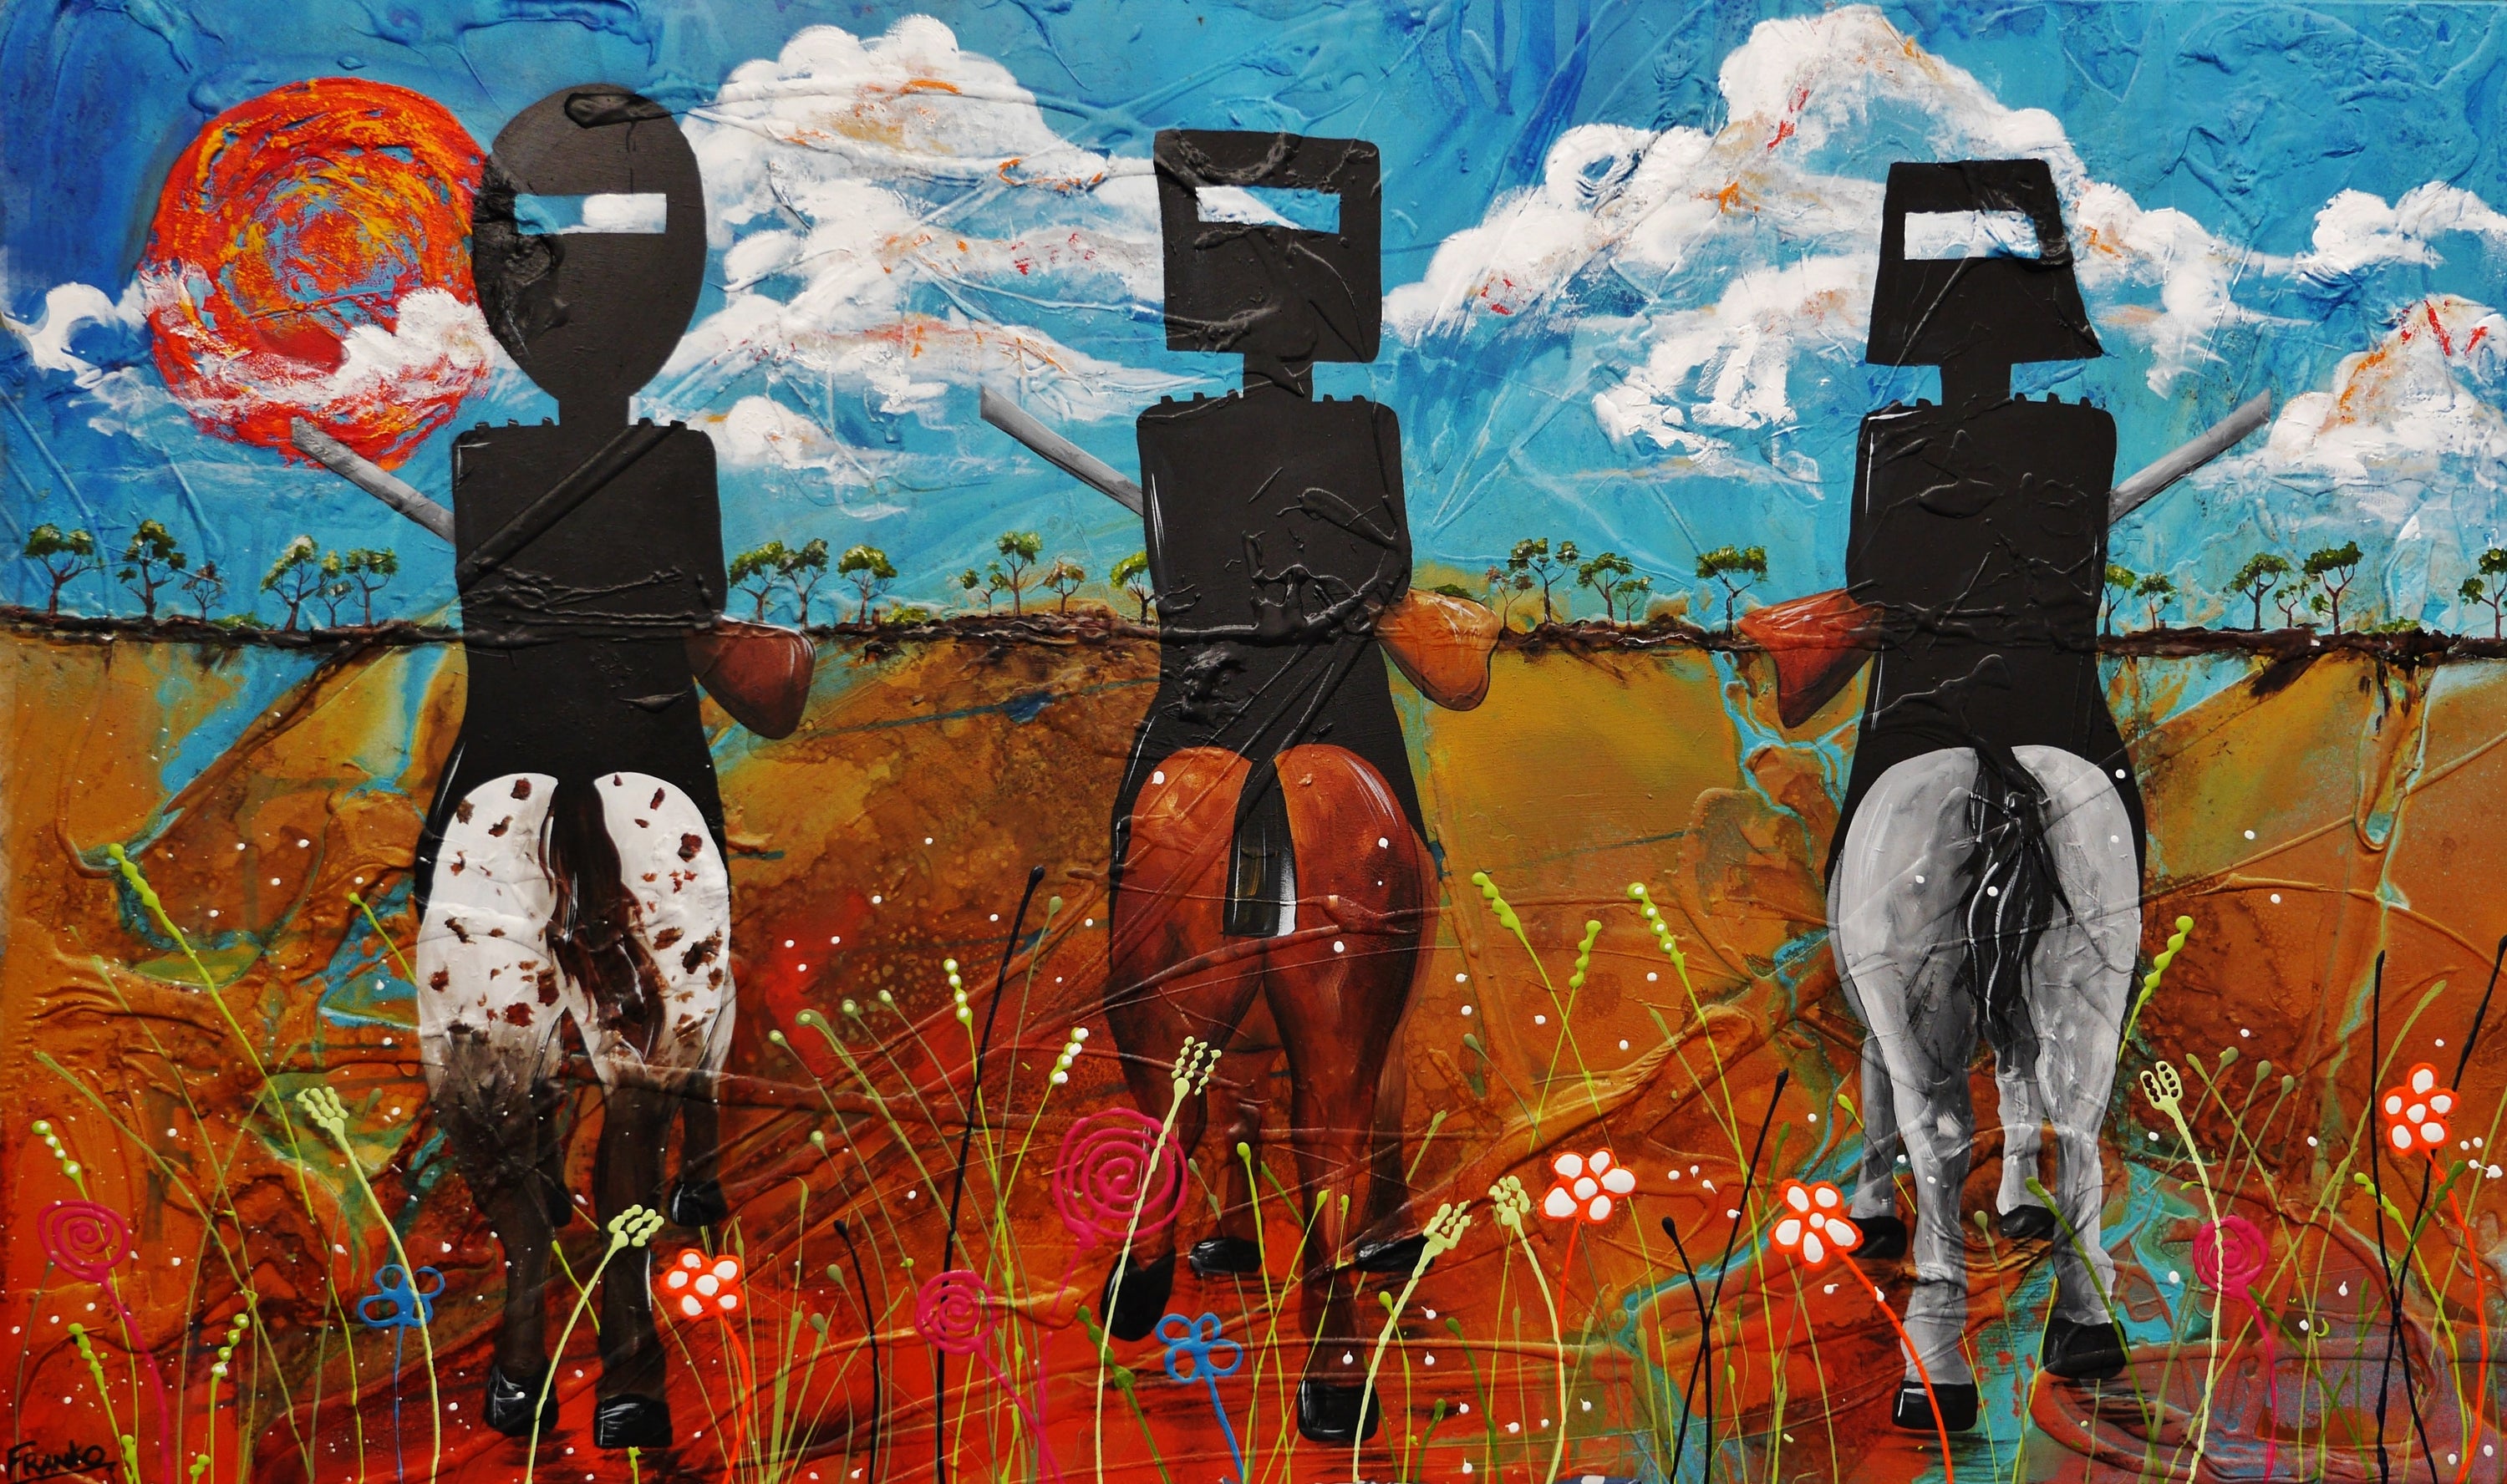 Kelly Three 200cm x 120cm Ned Kelly Abstract Realism Textured Painting